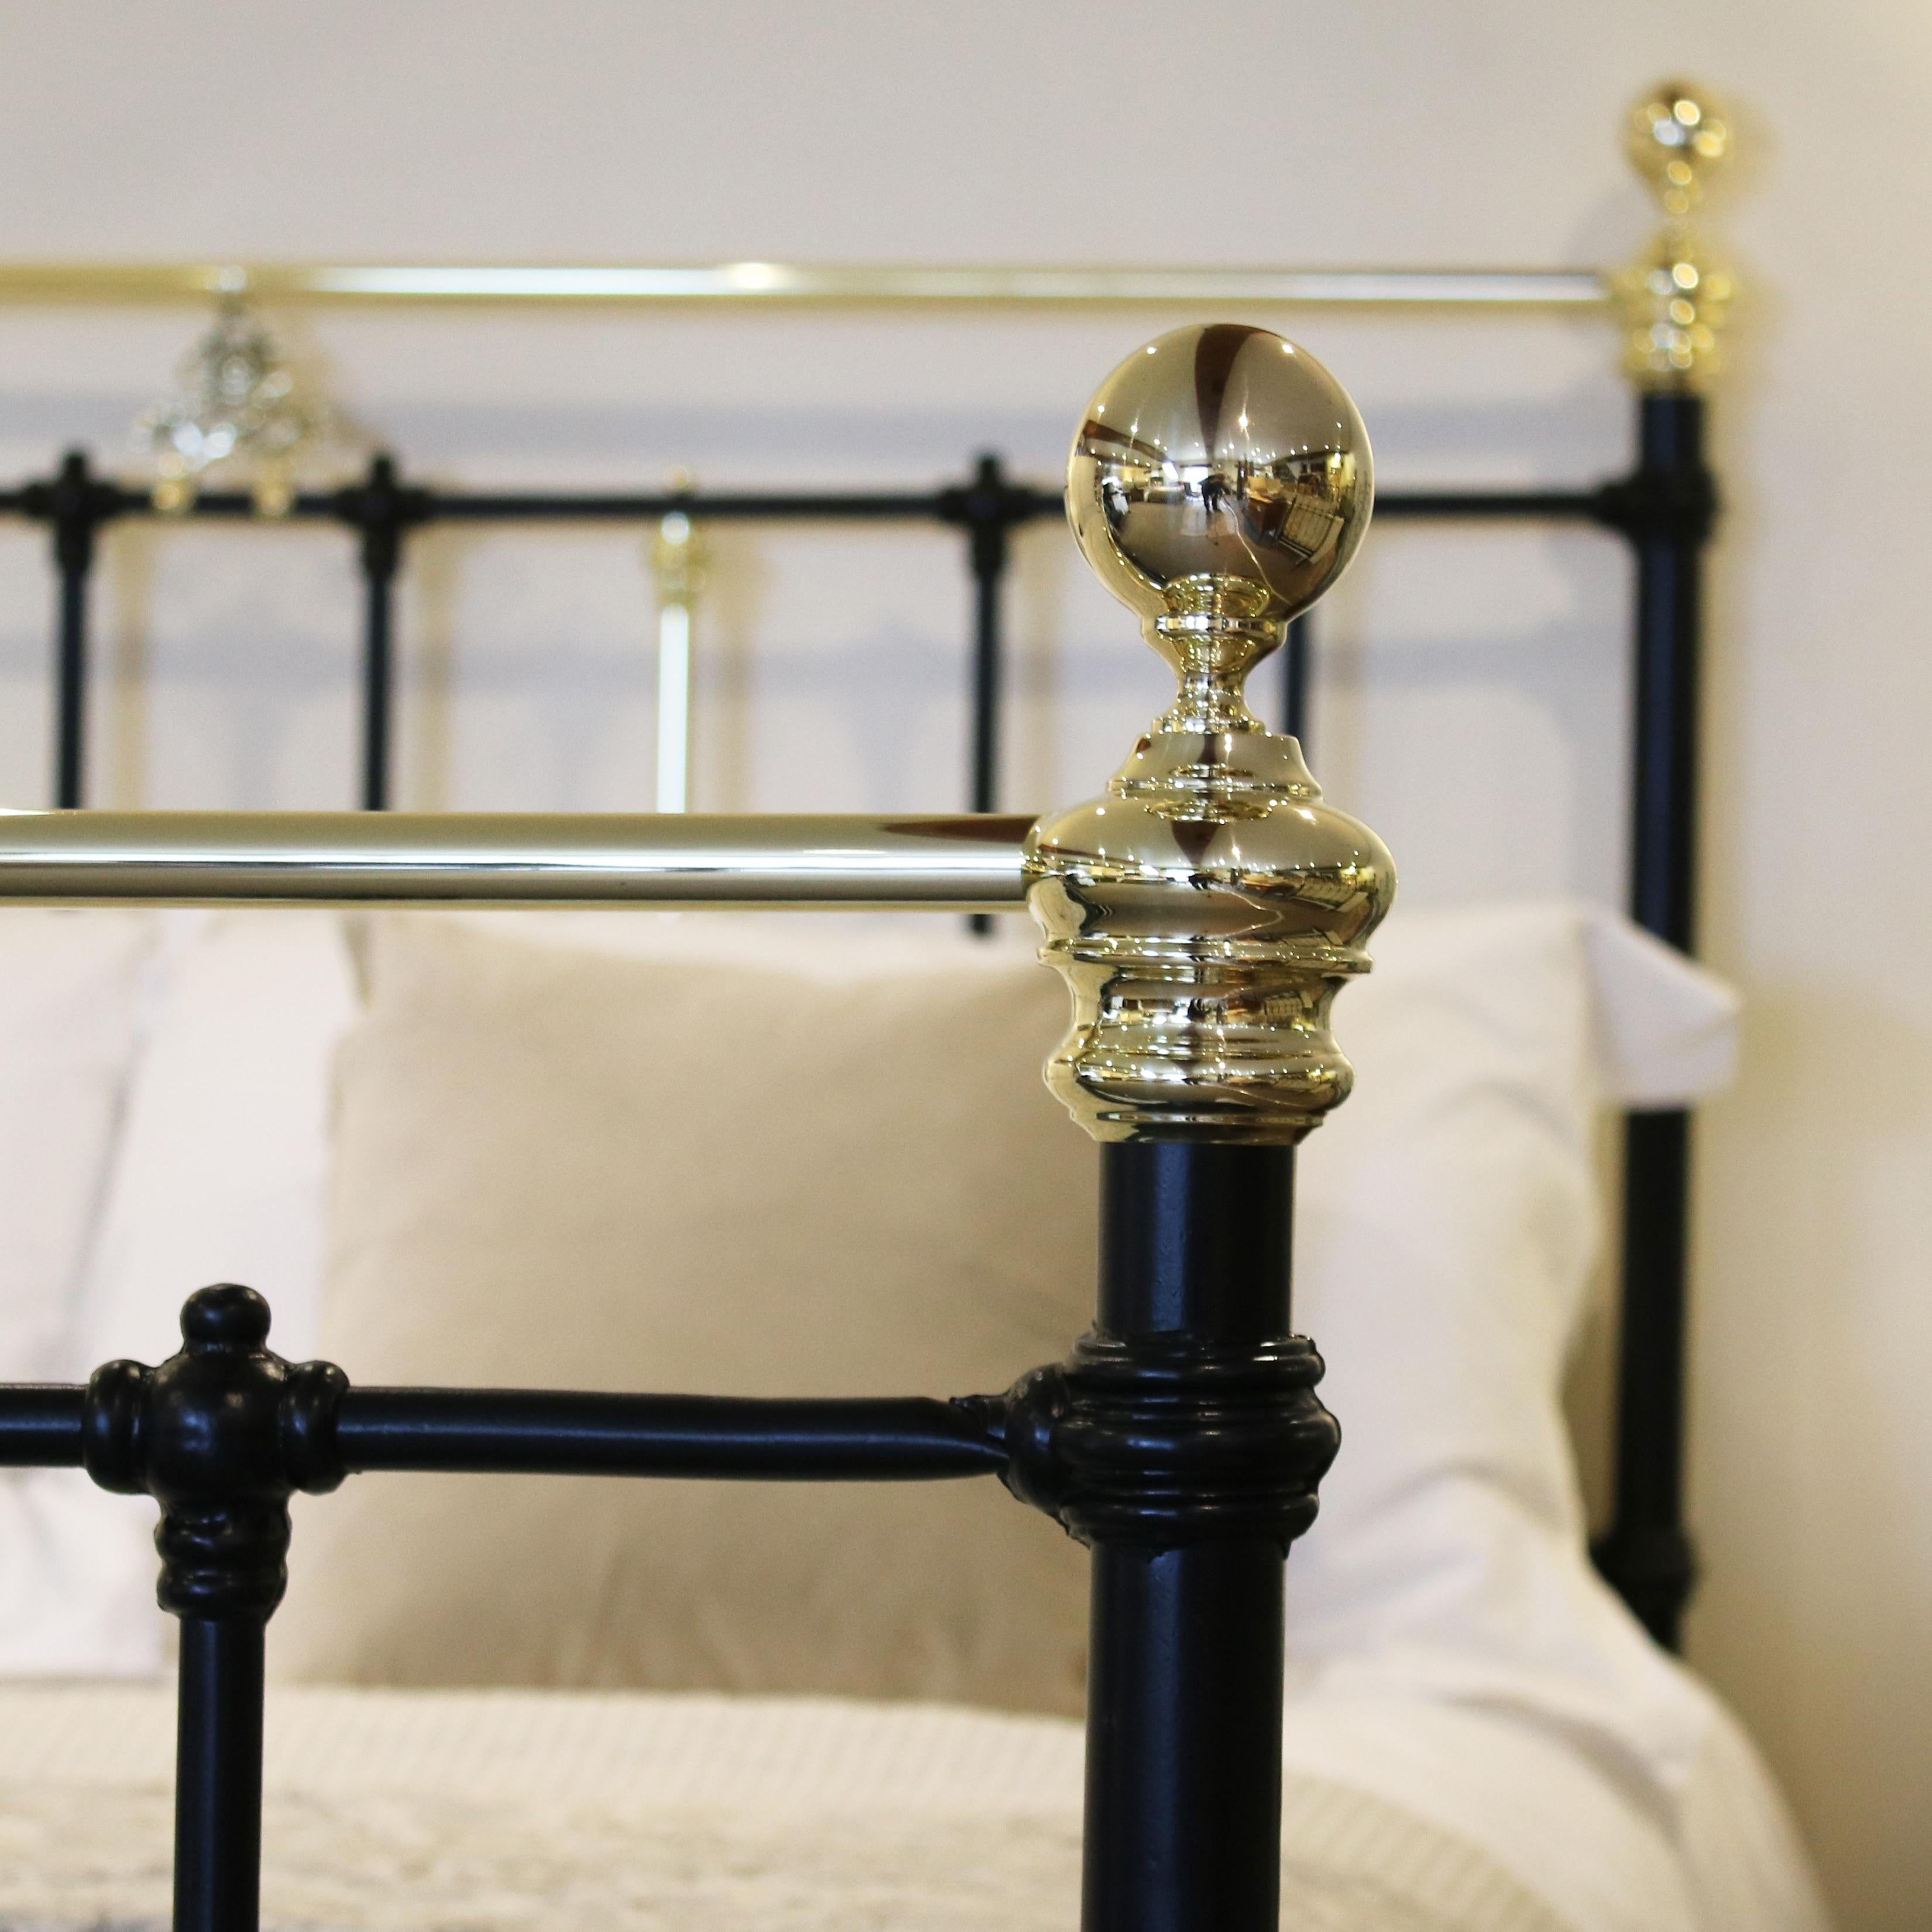 19th Century Brass and Iron Antique Bed in Black, MK170